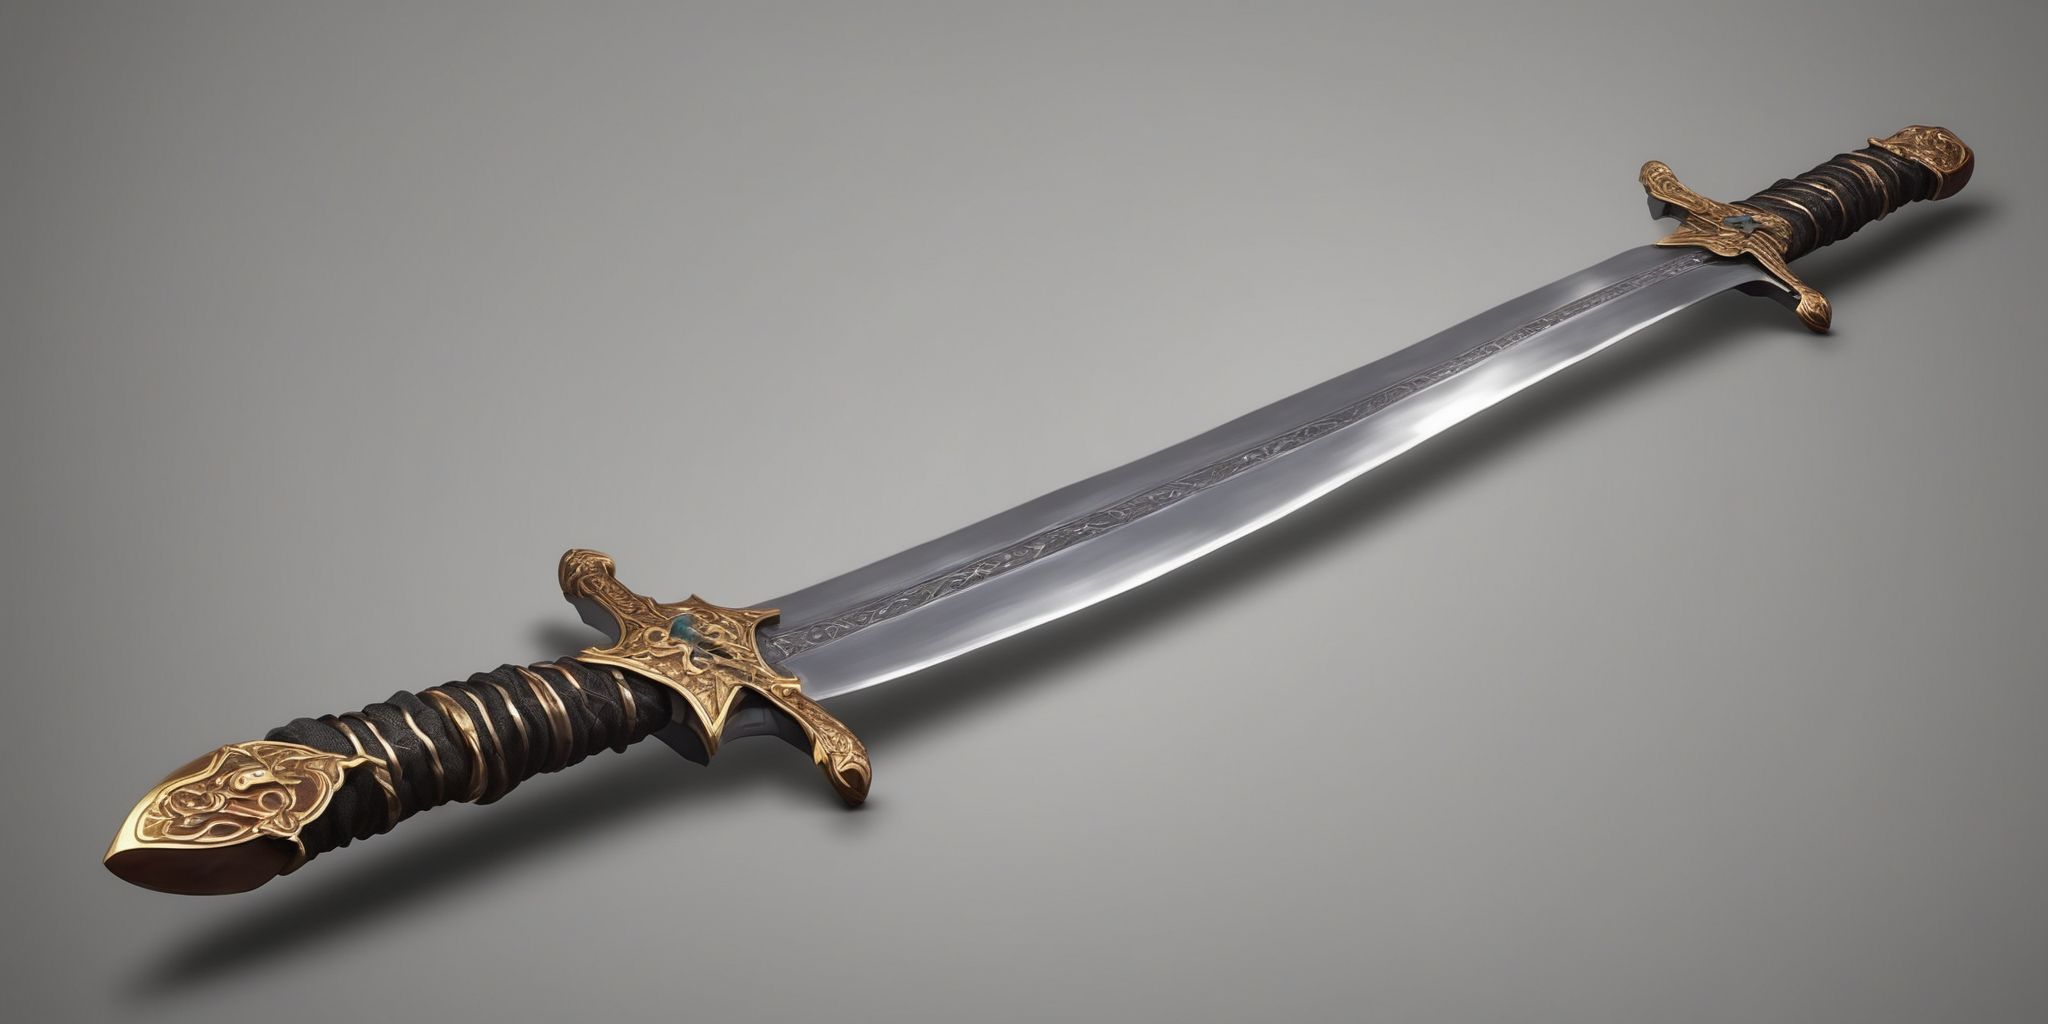 Sword  in realistic, photographic style